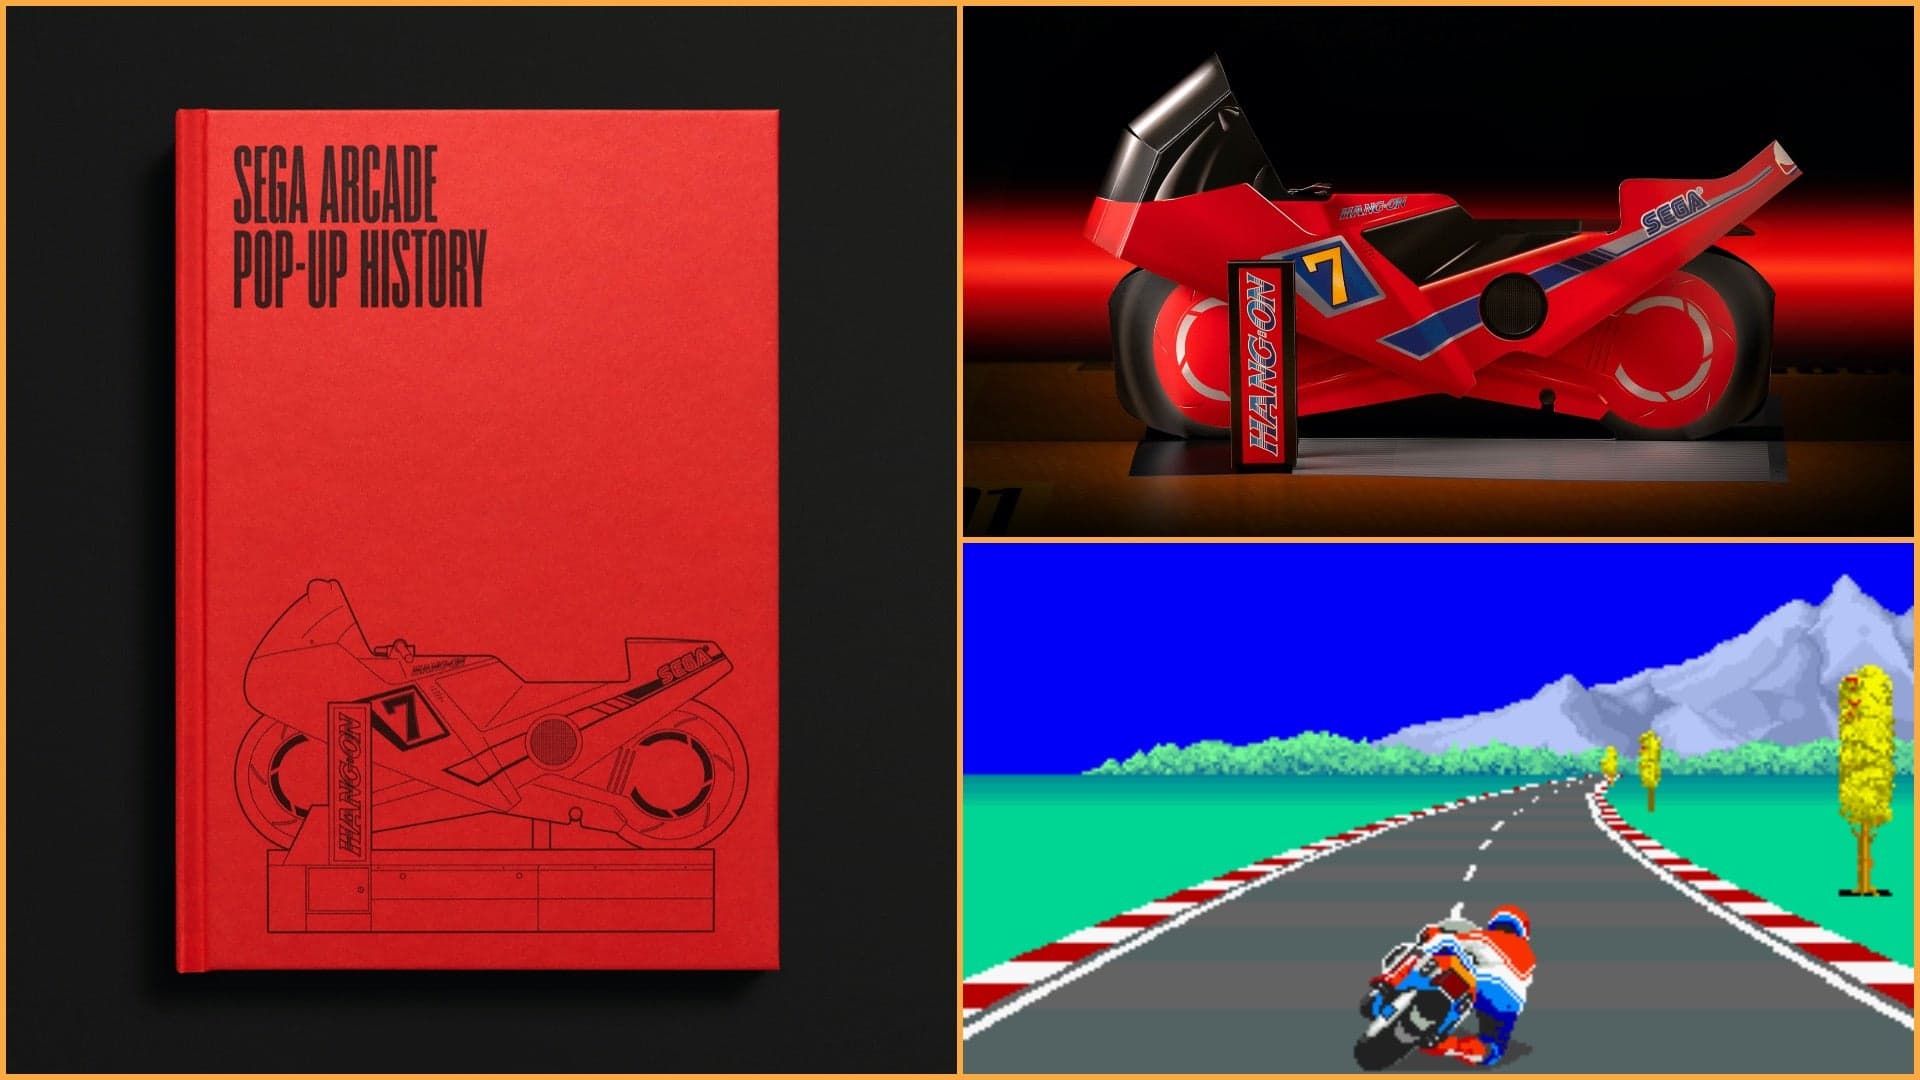 Relive ’80s Arcades With This SEGA Racing Game Pop-Up Art Book